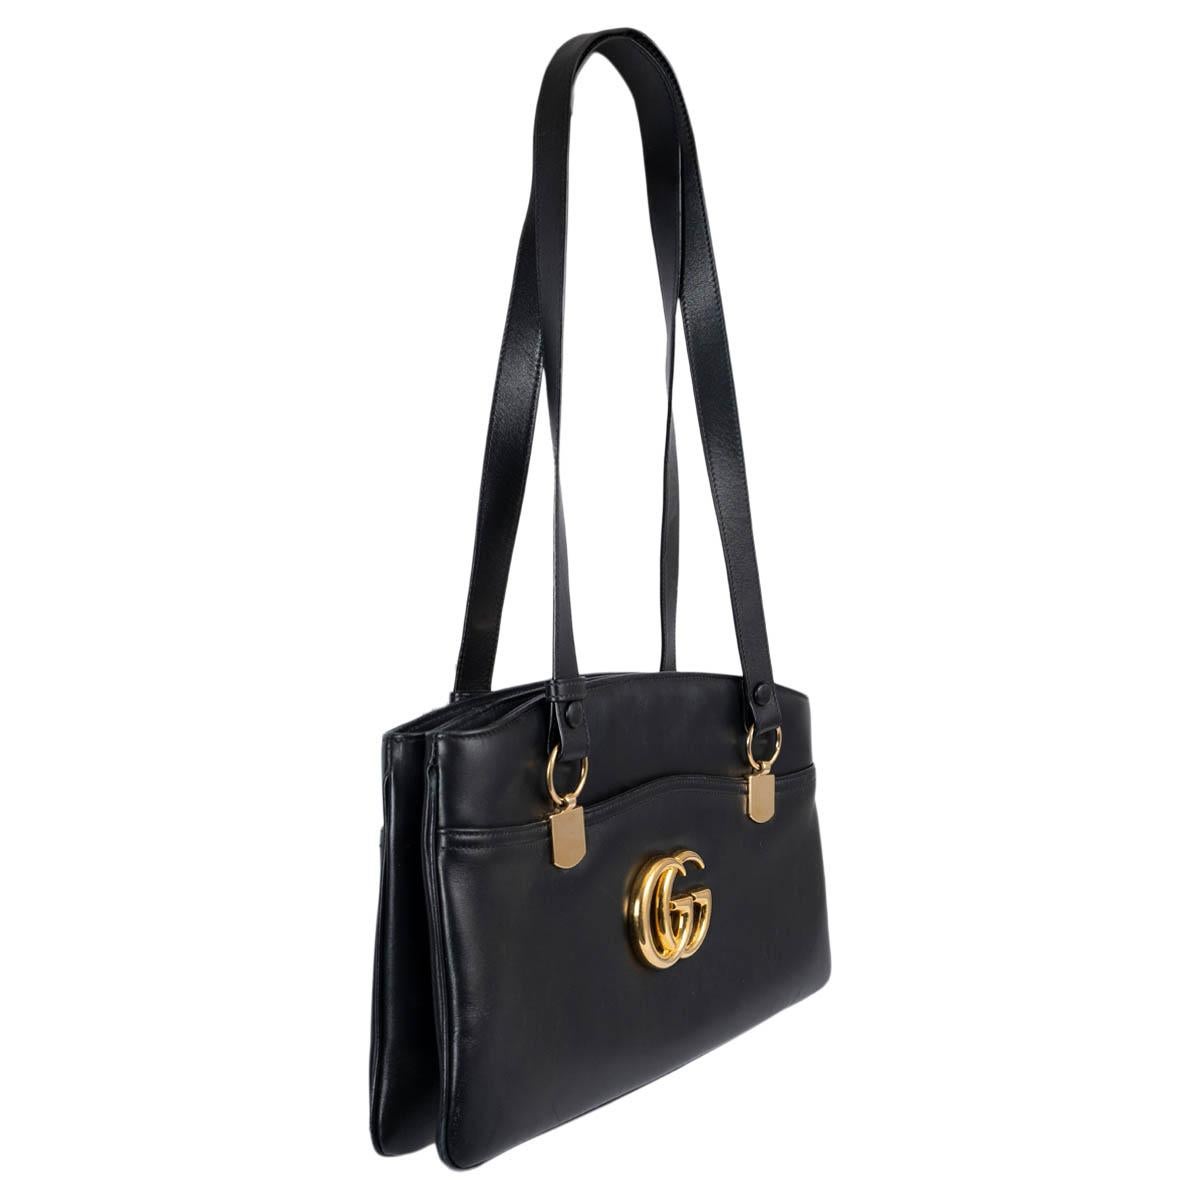 100% authentic Gucci Arli large tote in black calfskin featuring gold-tone hardware. The interior is divided in two compartment with zipper closure and lined in light pink grosgrain fabric with one zipper pocket against the back. The design features